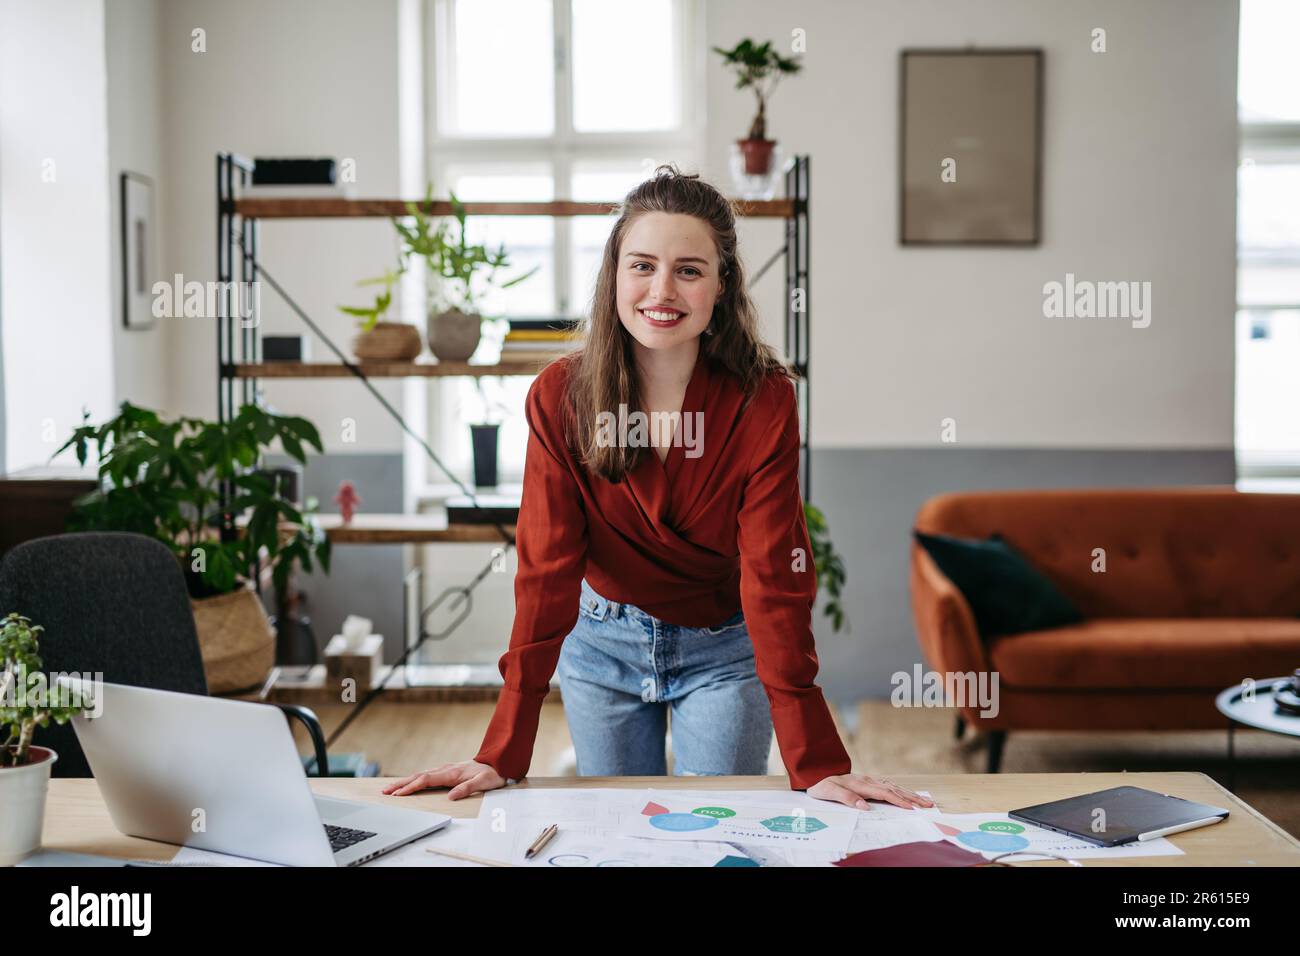 Portrait of young happy woman in office. Stock Photo